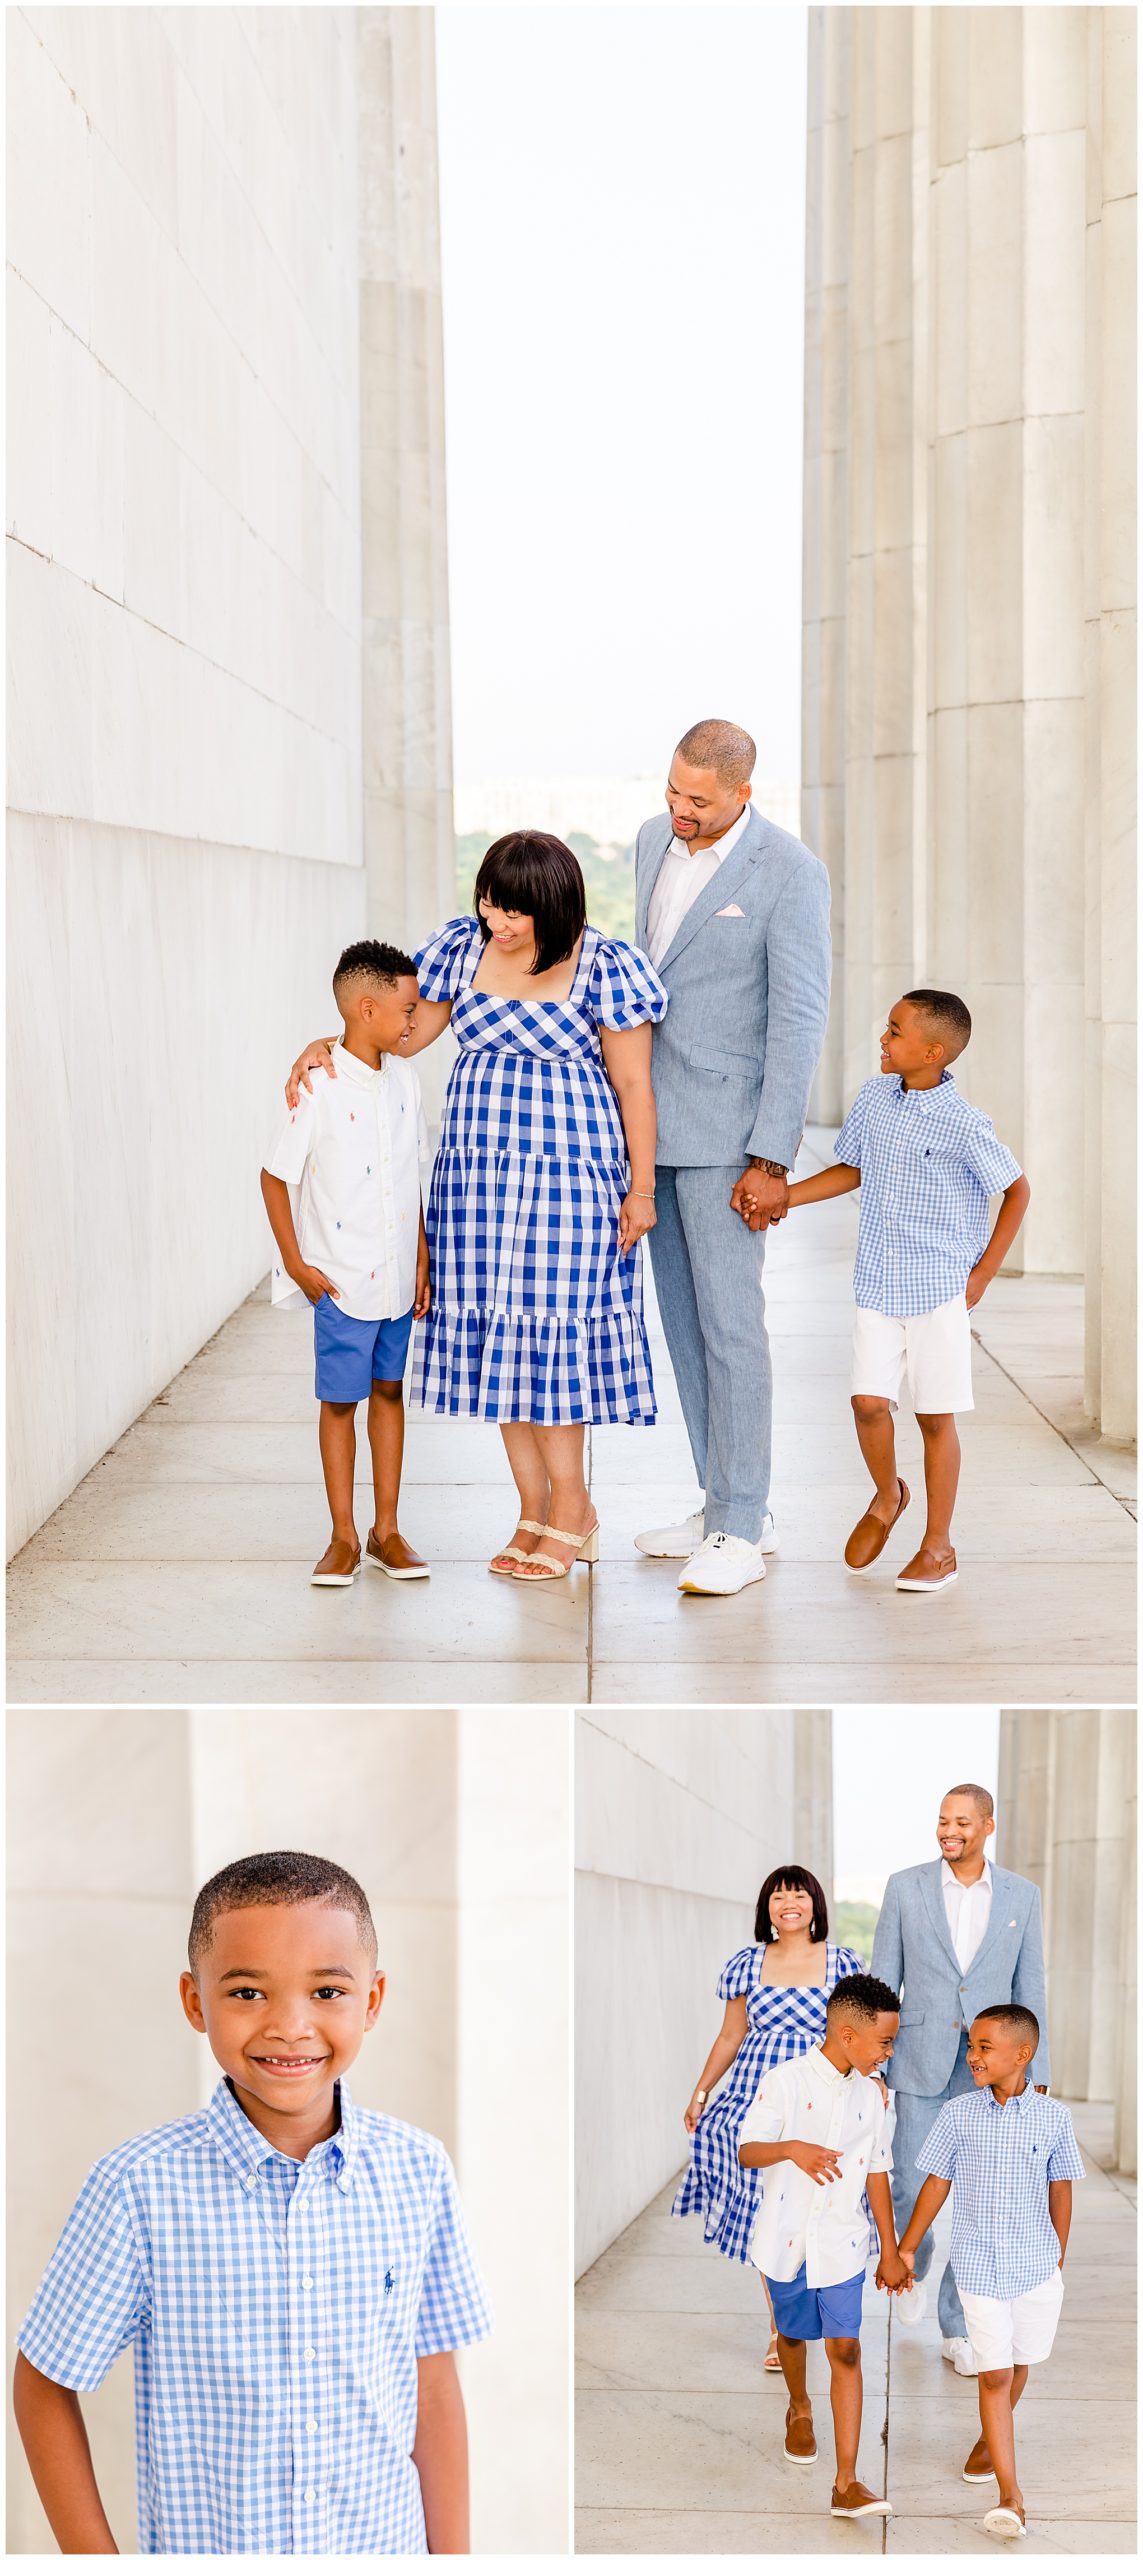 summer Lincoln Memorial family photos, Lincoln Memorial portraits, DC family photos, National Mall family photos, summer of four, family portrait poses, Lincoln Memorial portraits, DC family photographer, Rachel E.H. Photography, brothers holding hands, family smiling at each other